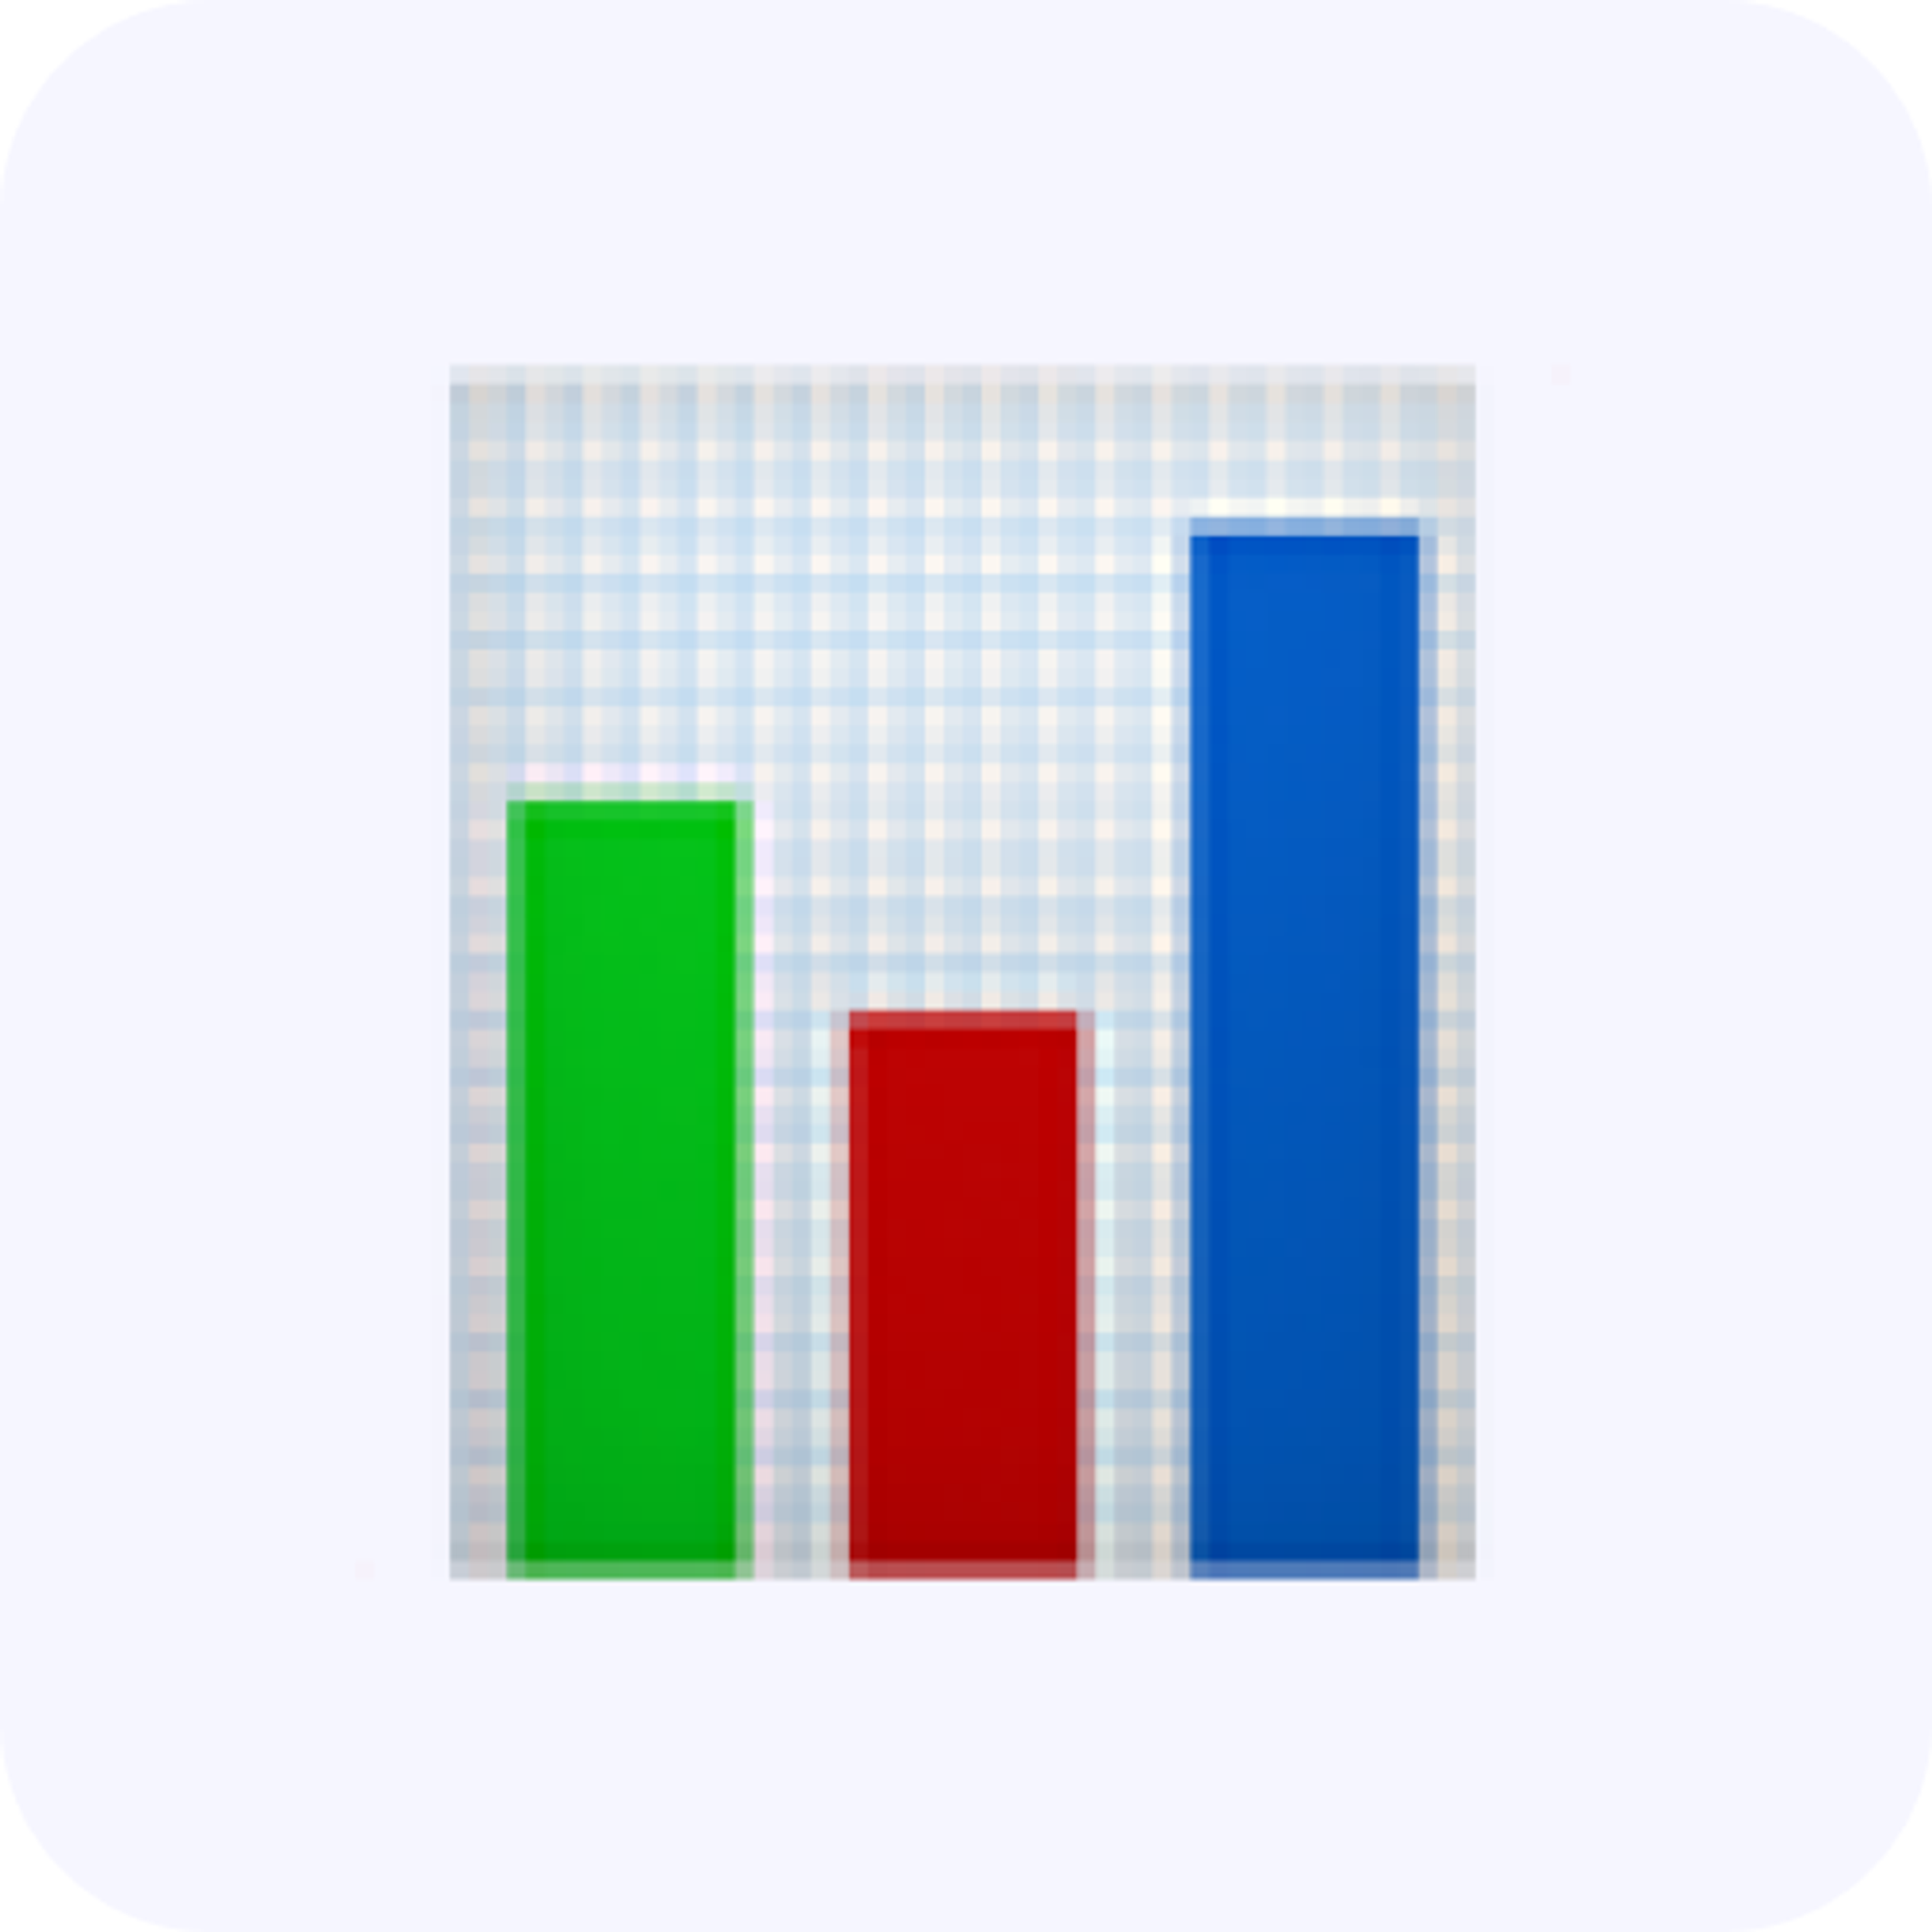 Create charts from a Notion database